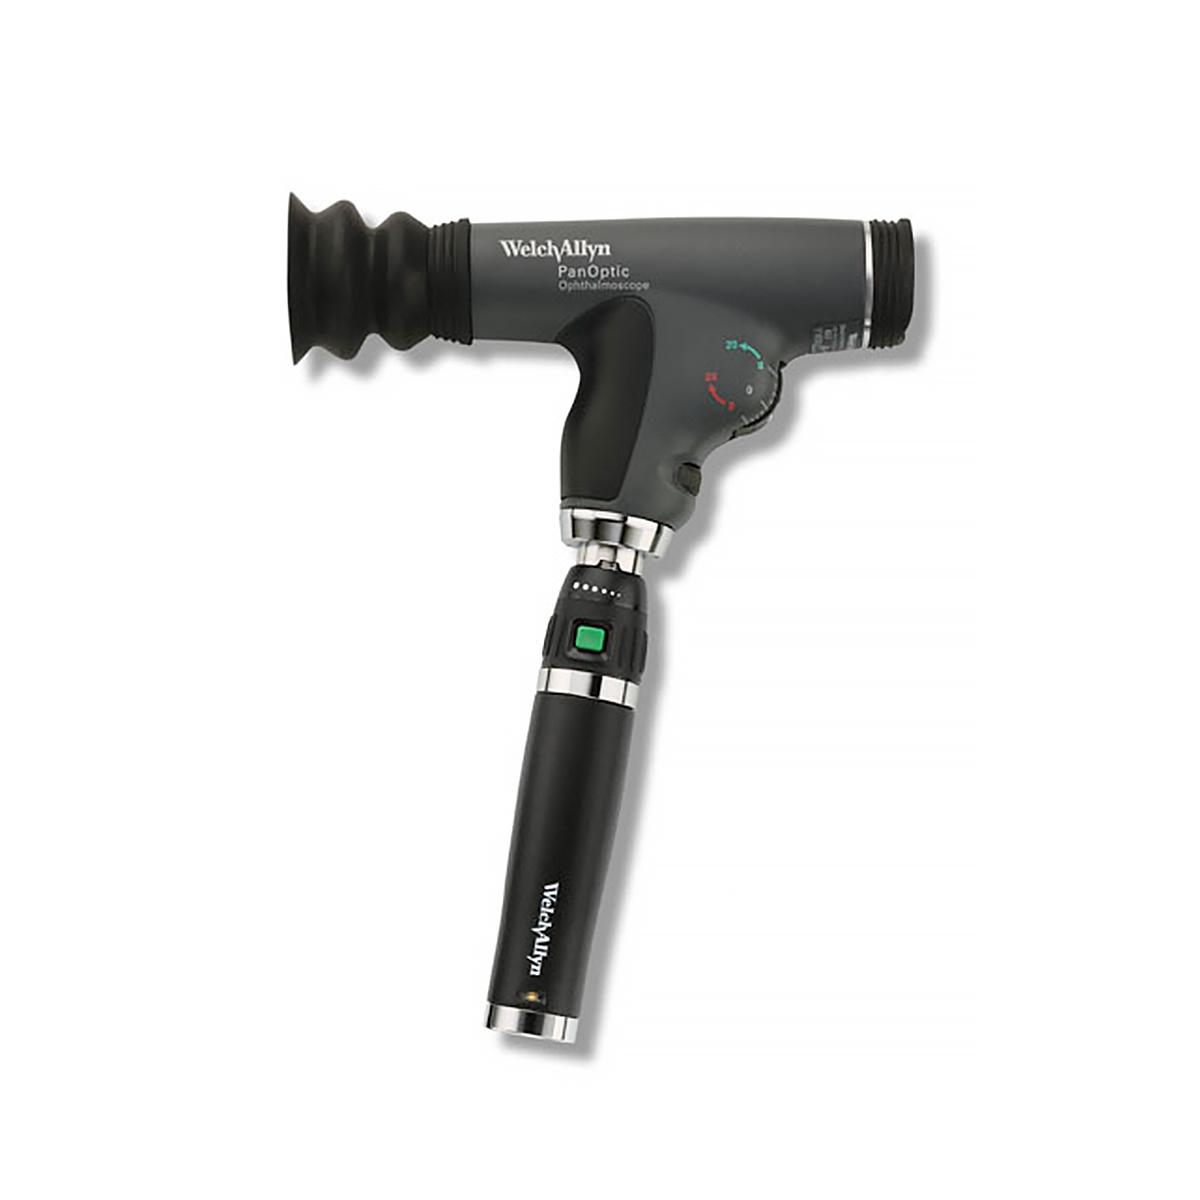 A profile view of a Welch Allyn PanOptic Ophthalmoscope head that is attached to a Welch Allyn hand-held light source.